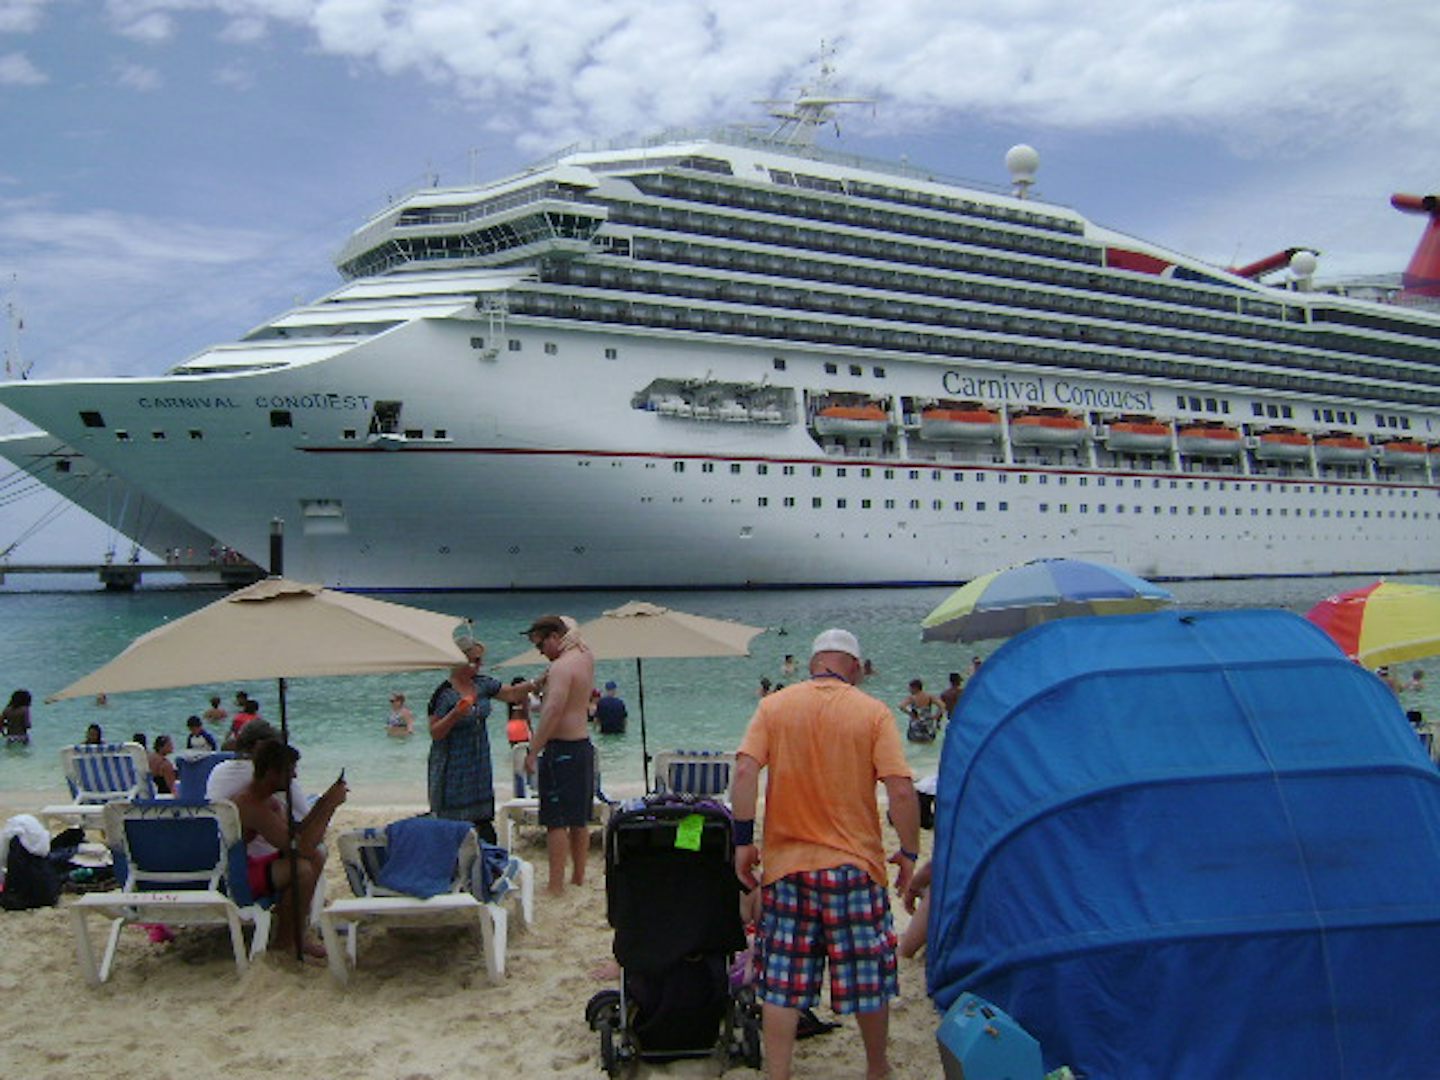 The Carnival Conquest from the beach in Grand Turk